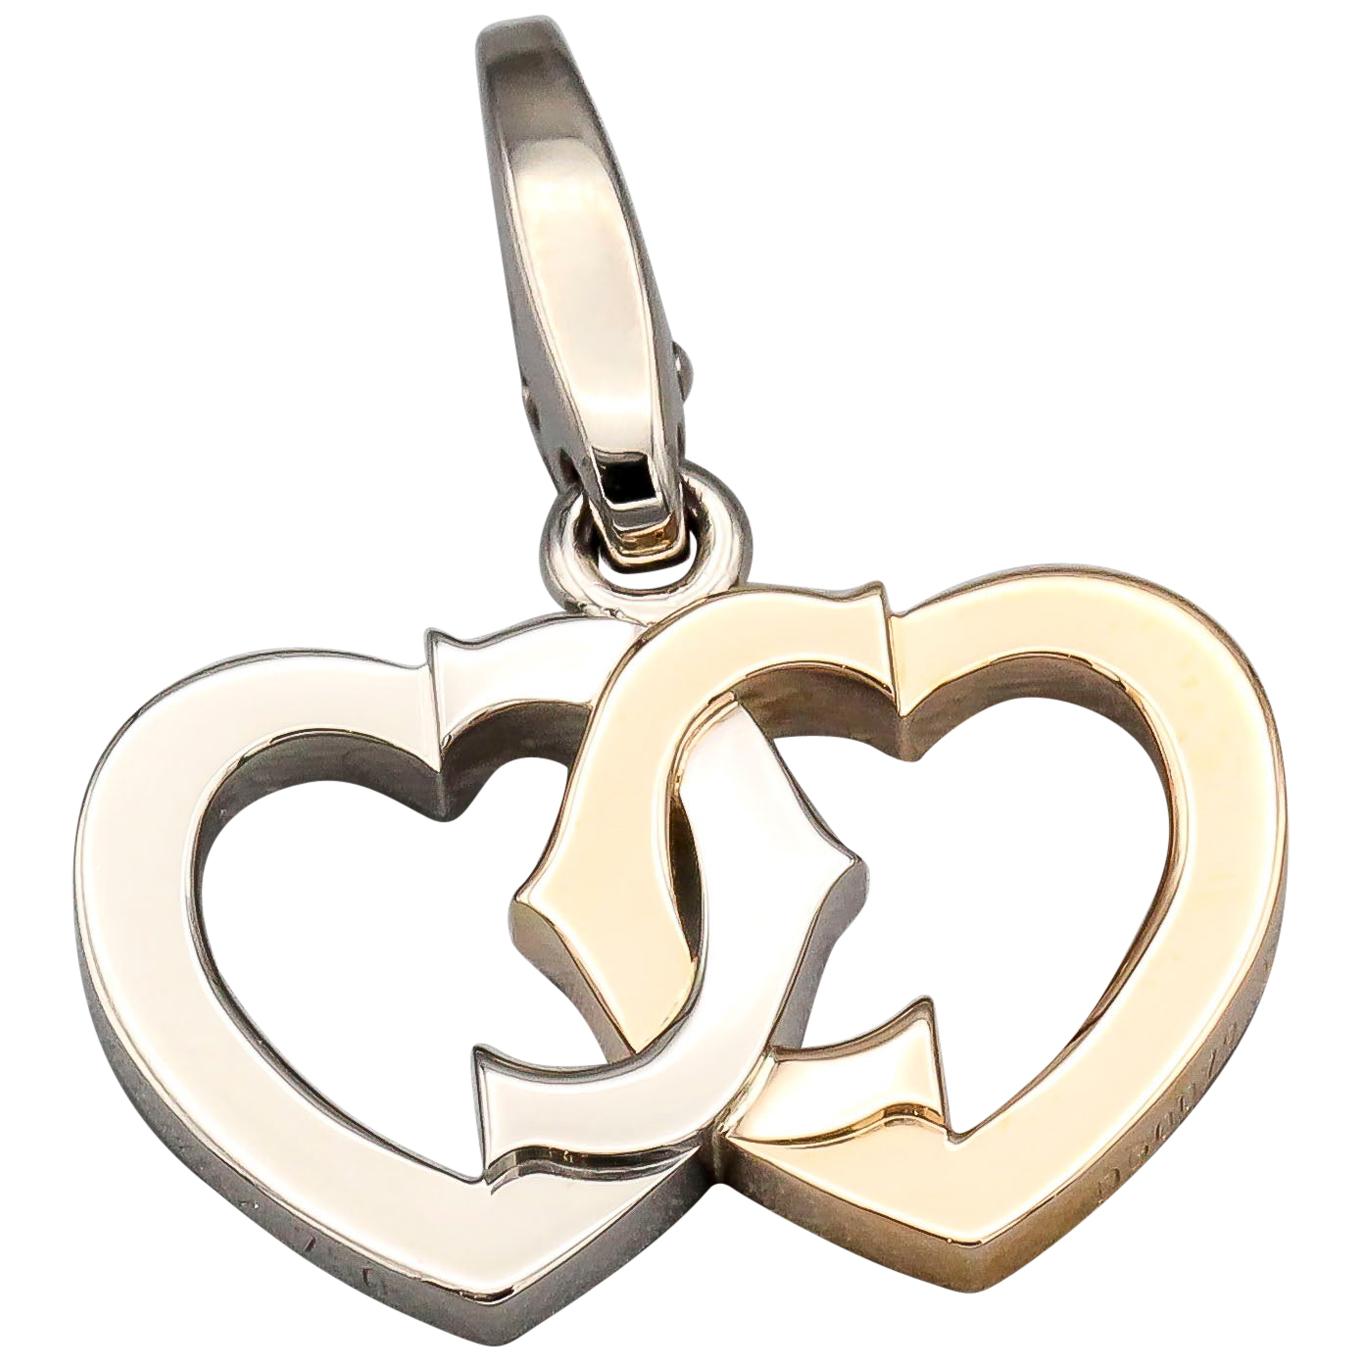 Cartier 18 Karat White and Yellow Gold Double Heart Logo Charm